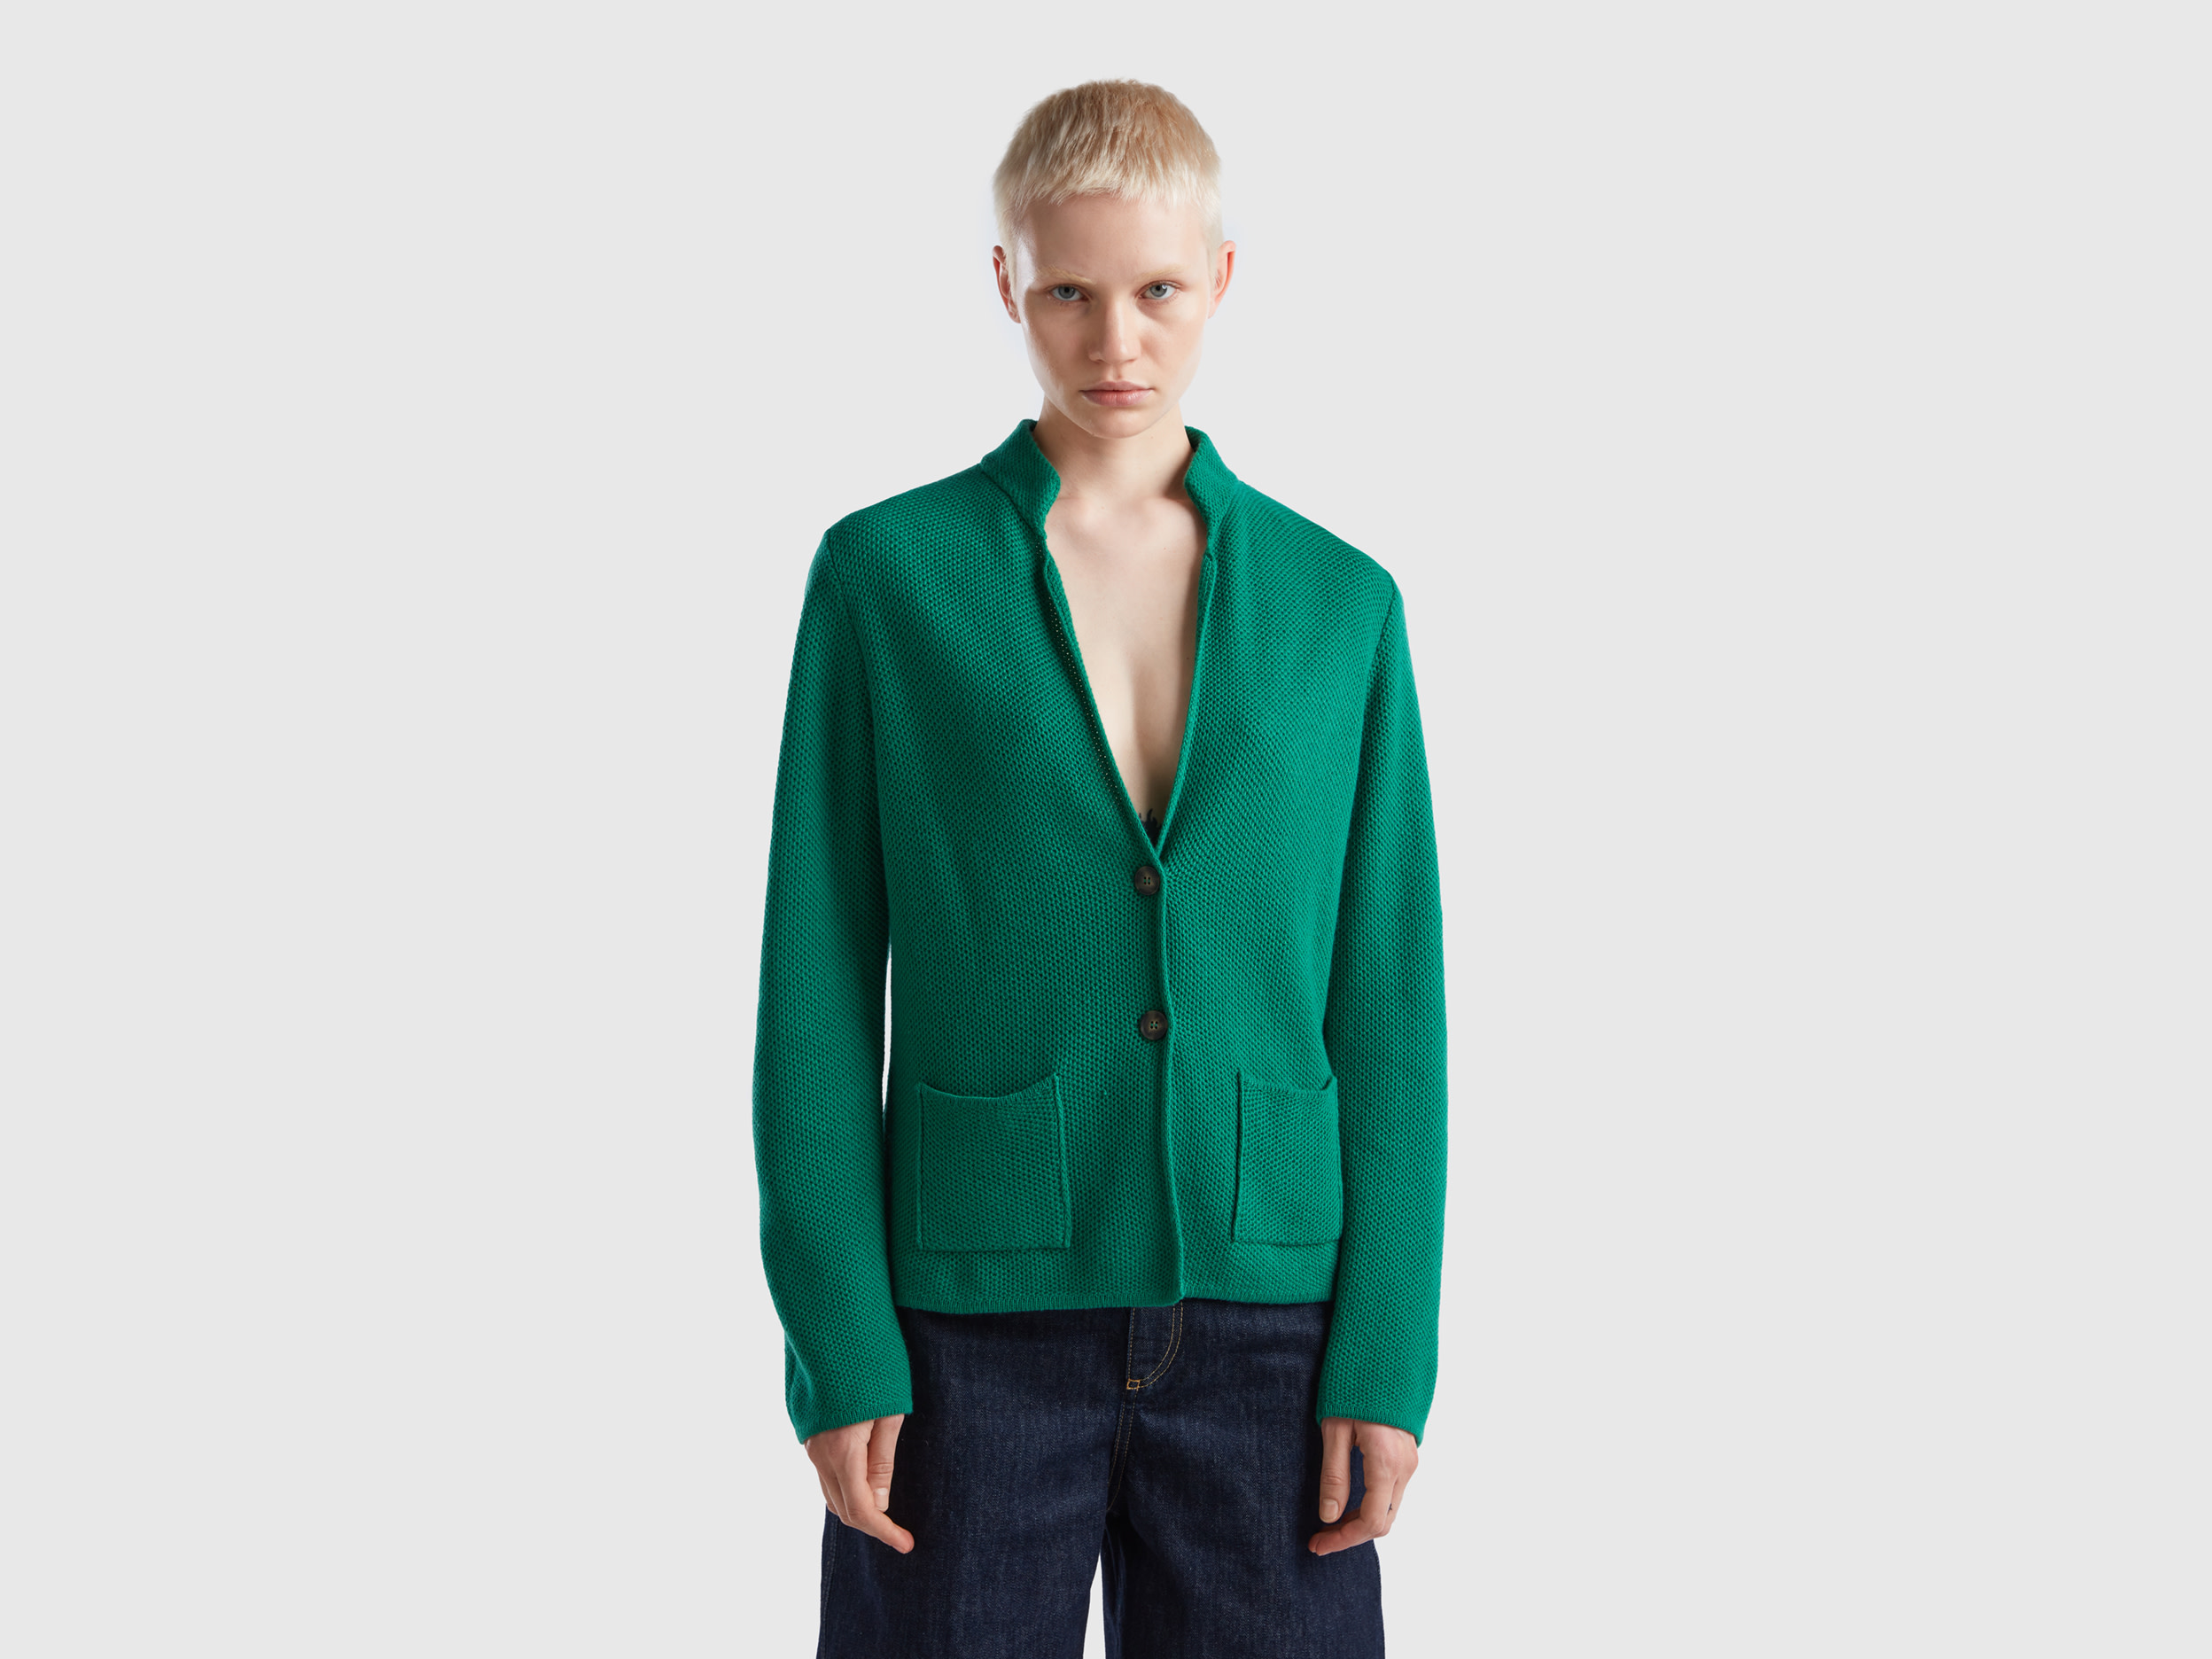 Benetton, Knit Jacket In Wool And Cashmere Blend, size M, Green, Women